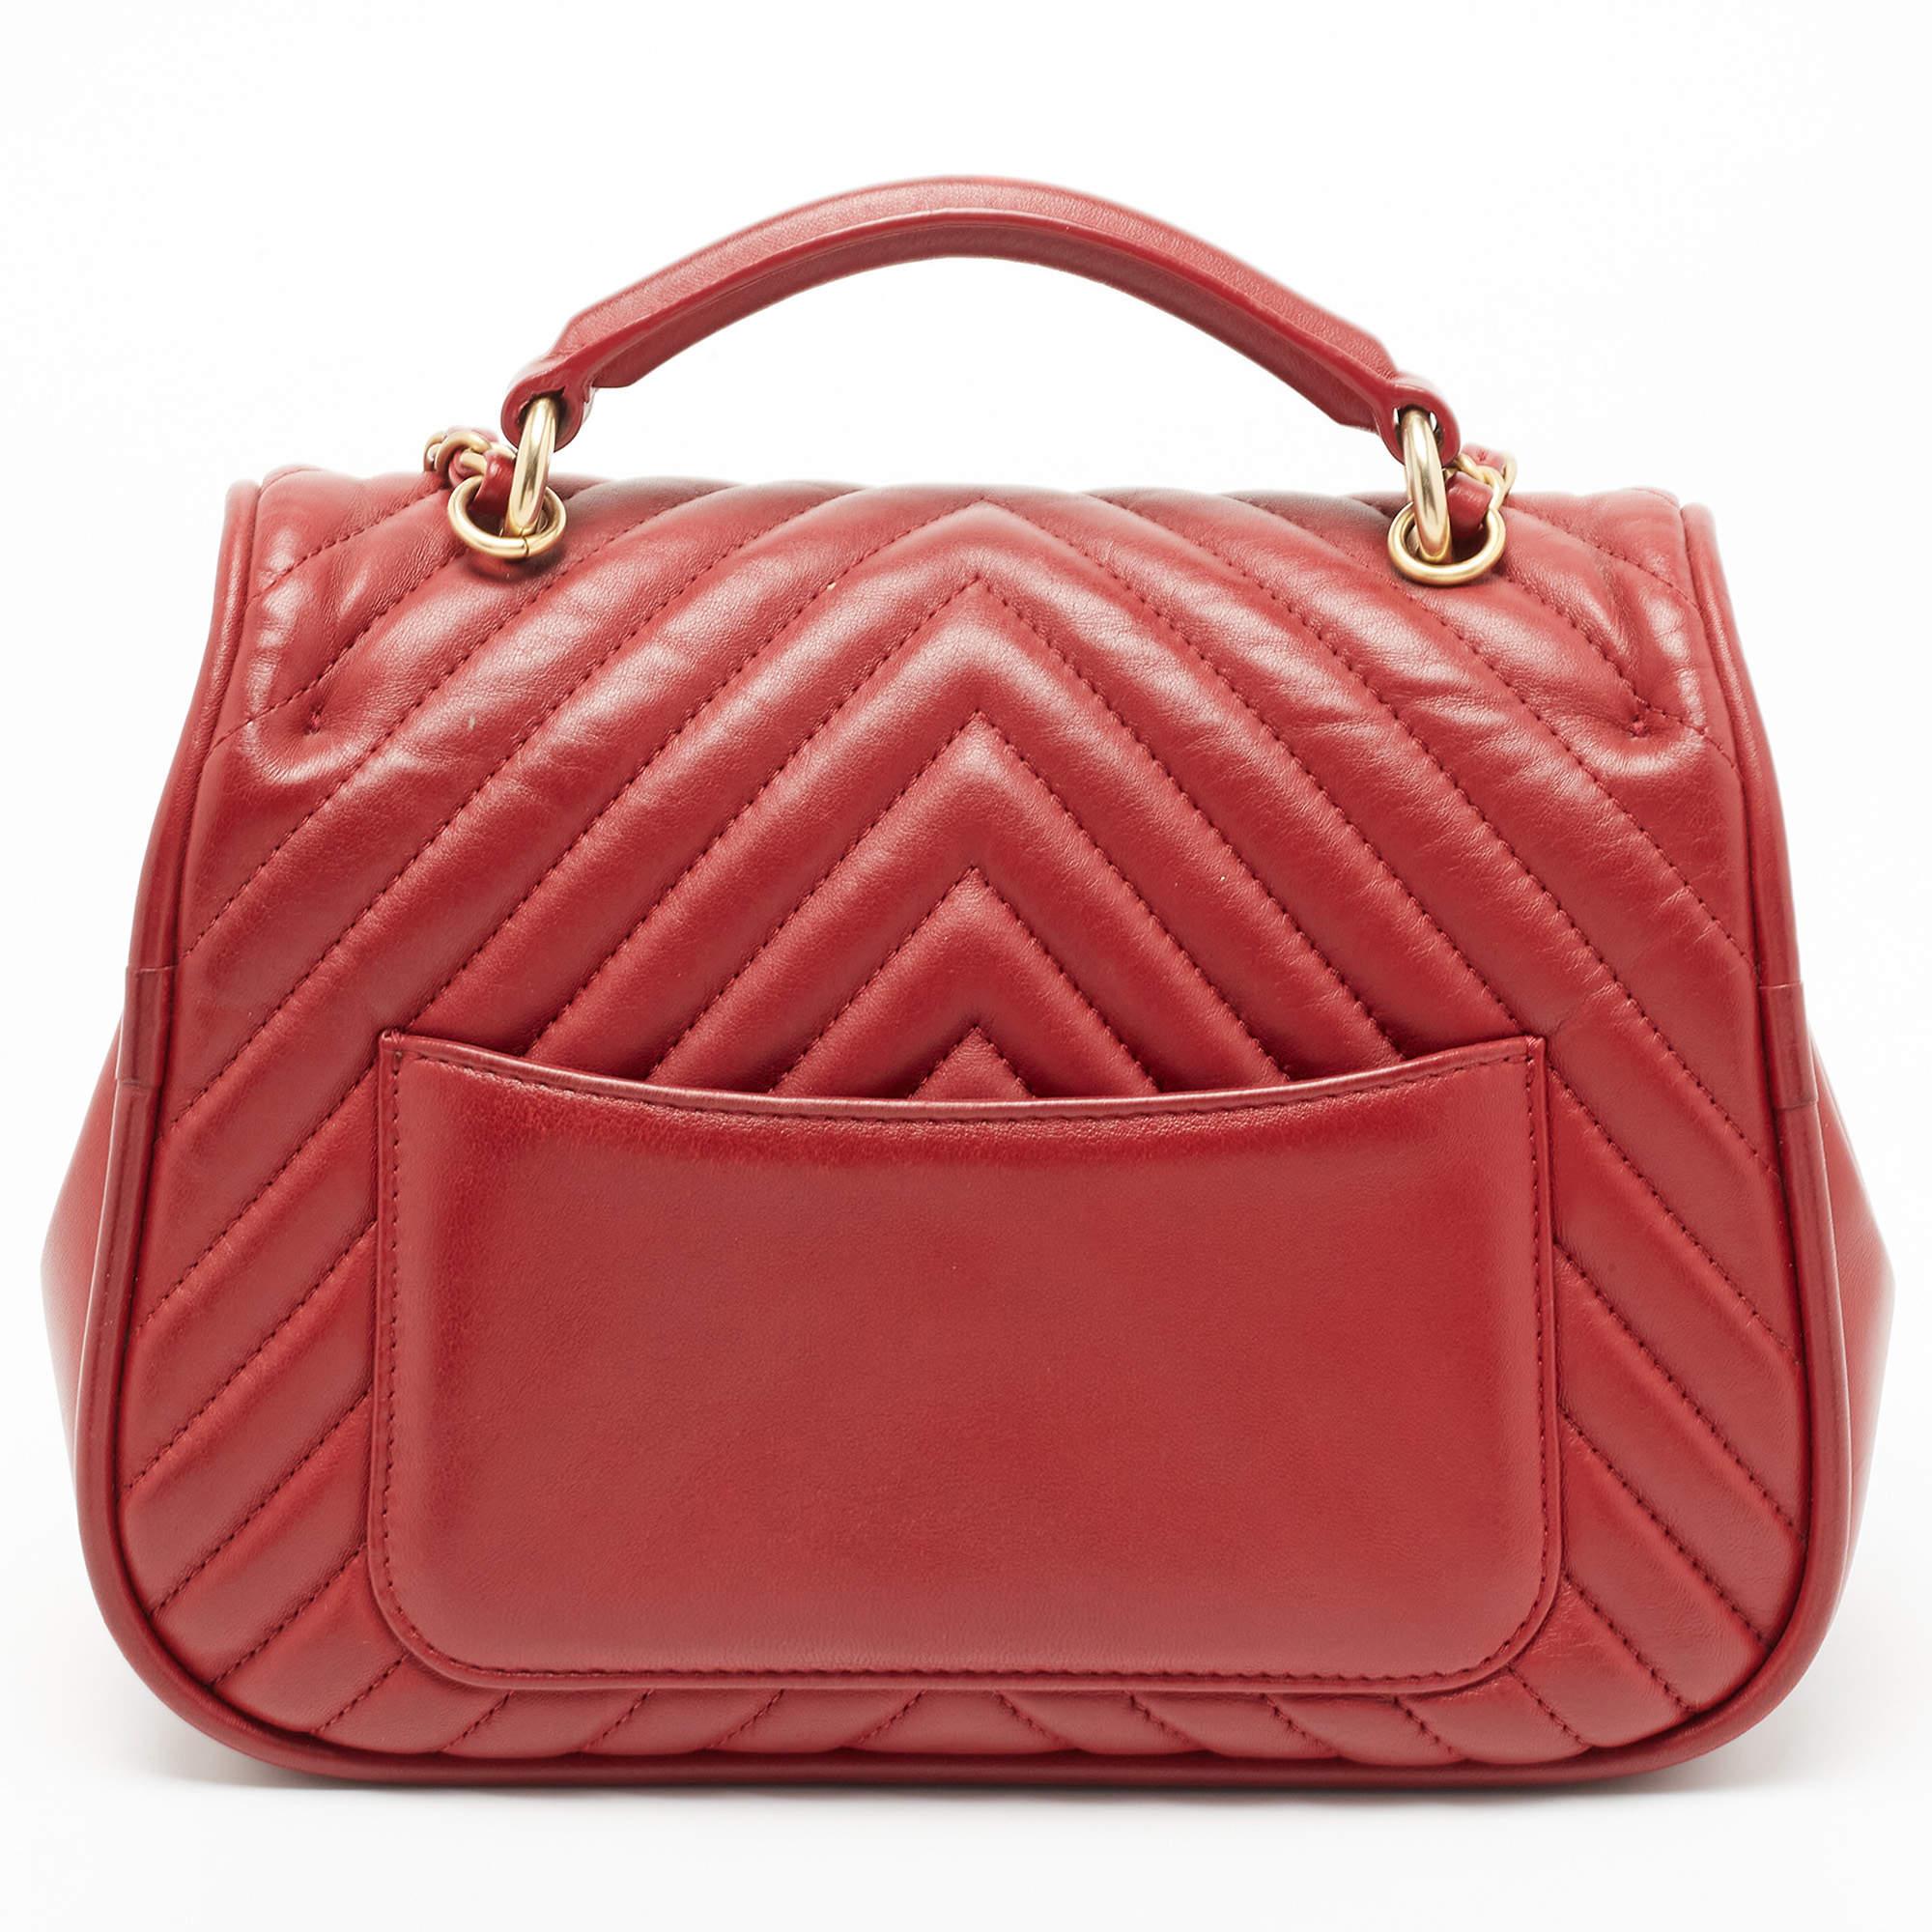 Chanel Red Chevron Leather CC Flap Top Handle Bag 4